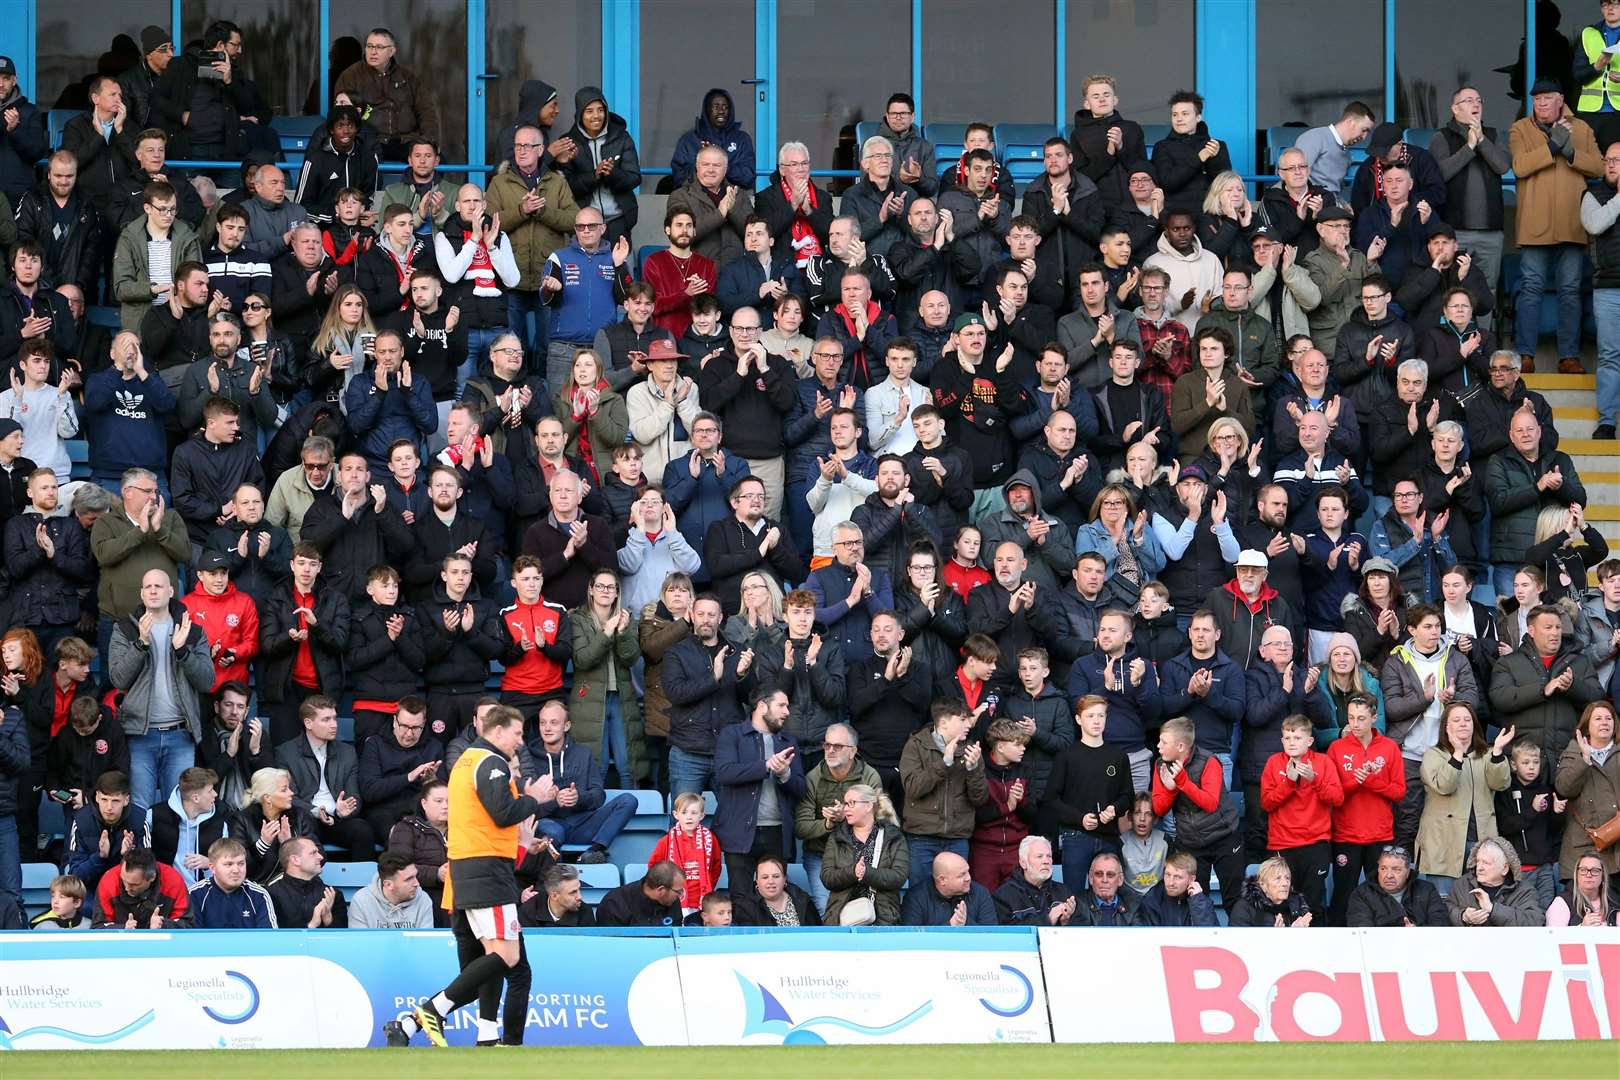 A crowd of 2,758 was at Priestfield to watch the match Picture: PSP Images